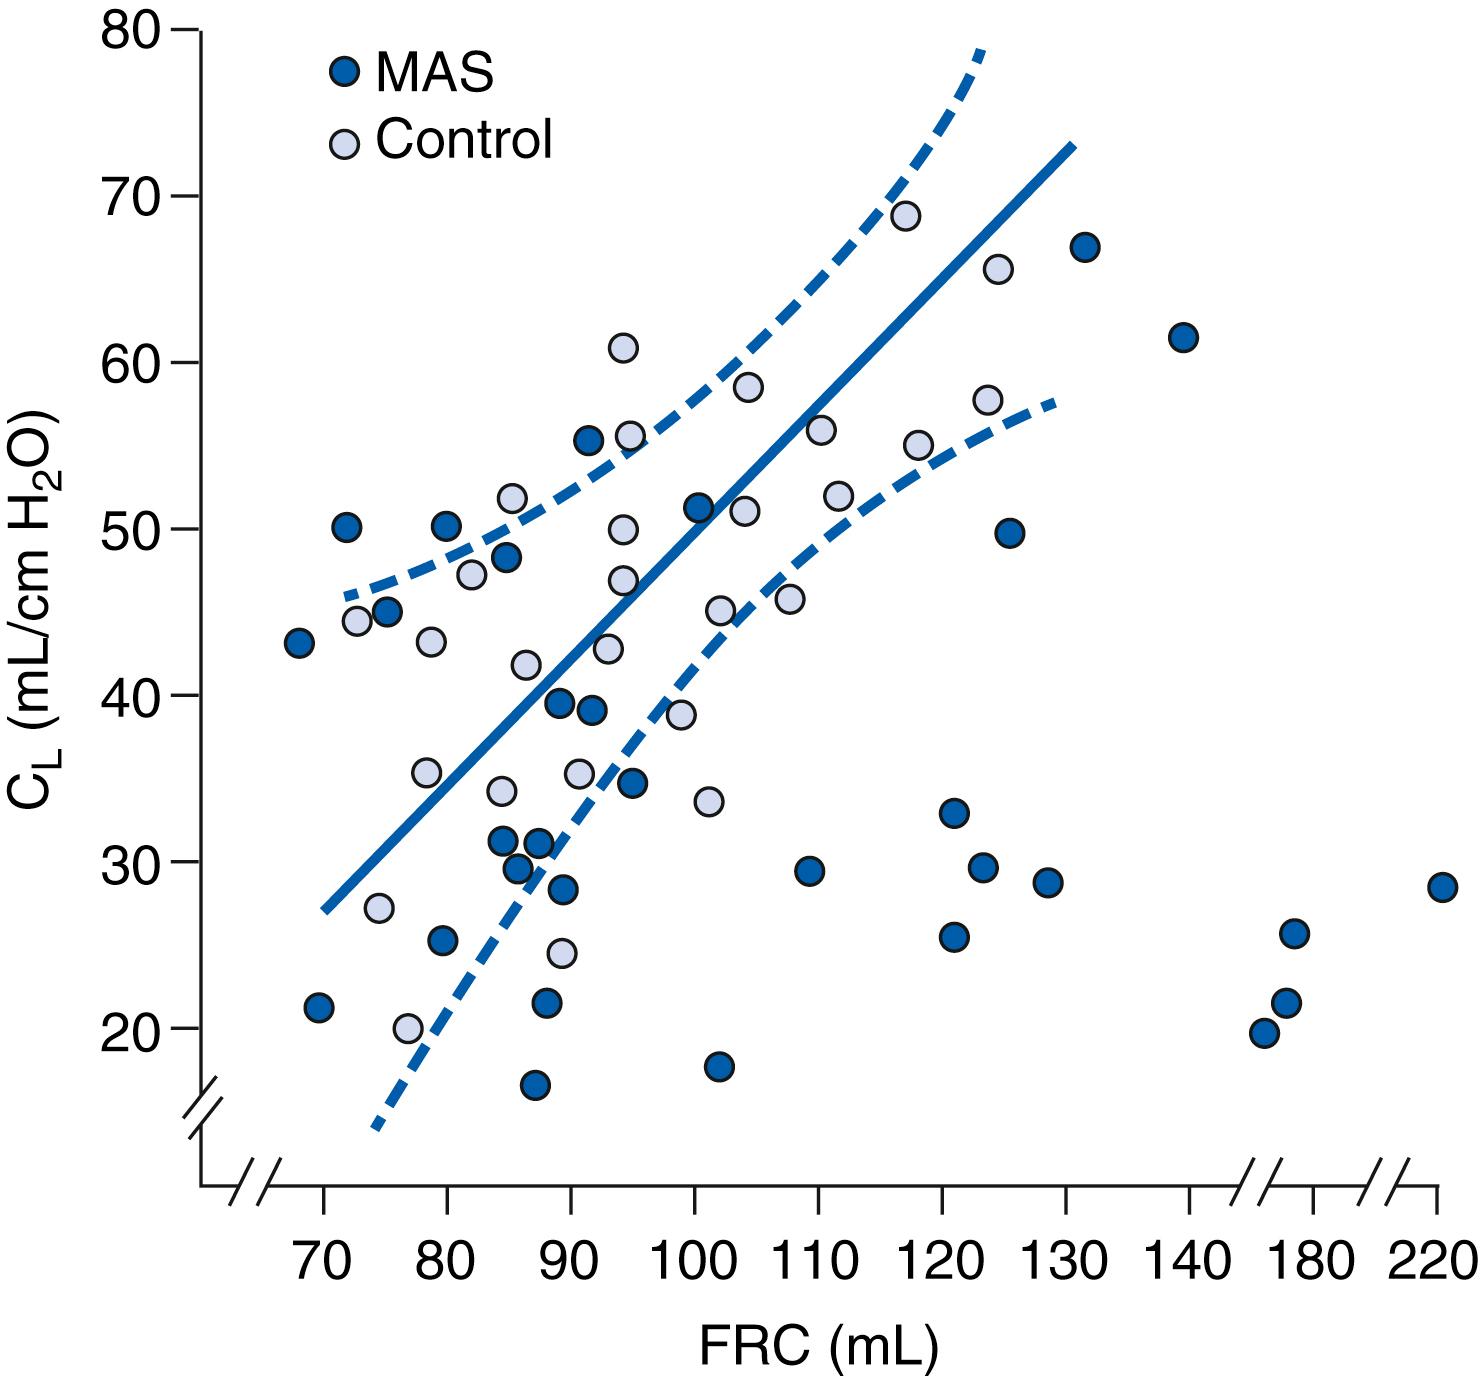 Fig. 158.2, Lung compliance in relation to functional residual capacity (FRC) . The dashed lines indicate the 95% confidence interval for normal patients. Each blue circle represents one test period for the 12 patients, and the gray circles are the control patients. As demonstrated, when the FRC was low and compliance remained low, the patients were found to be atelectatic on chest x-ray. However, when the FRC was high, patients were hyperinflated on chest x-ray. MAS , Meconium aspiration syndrome.